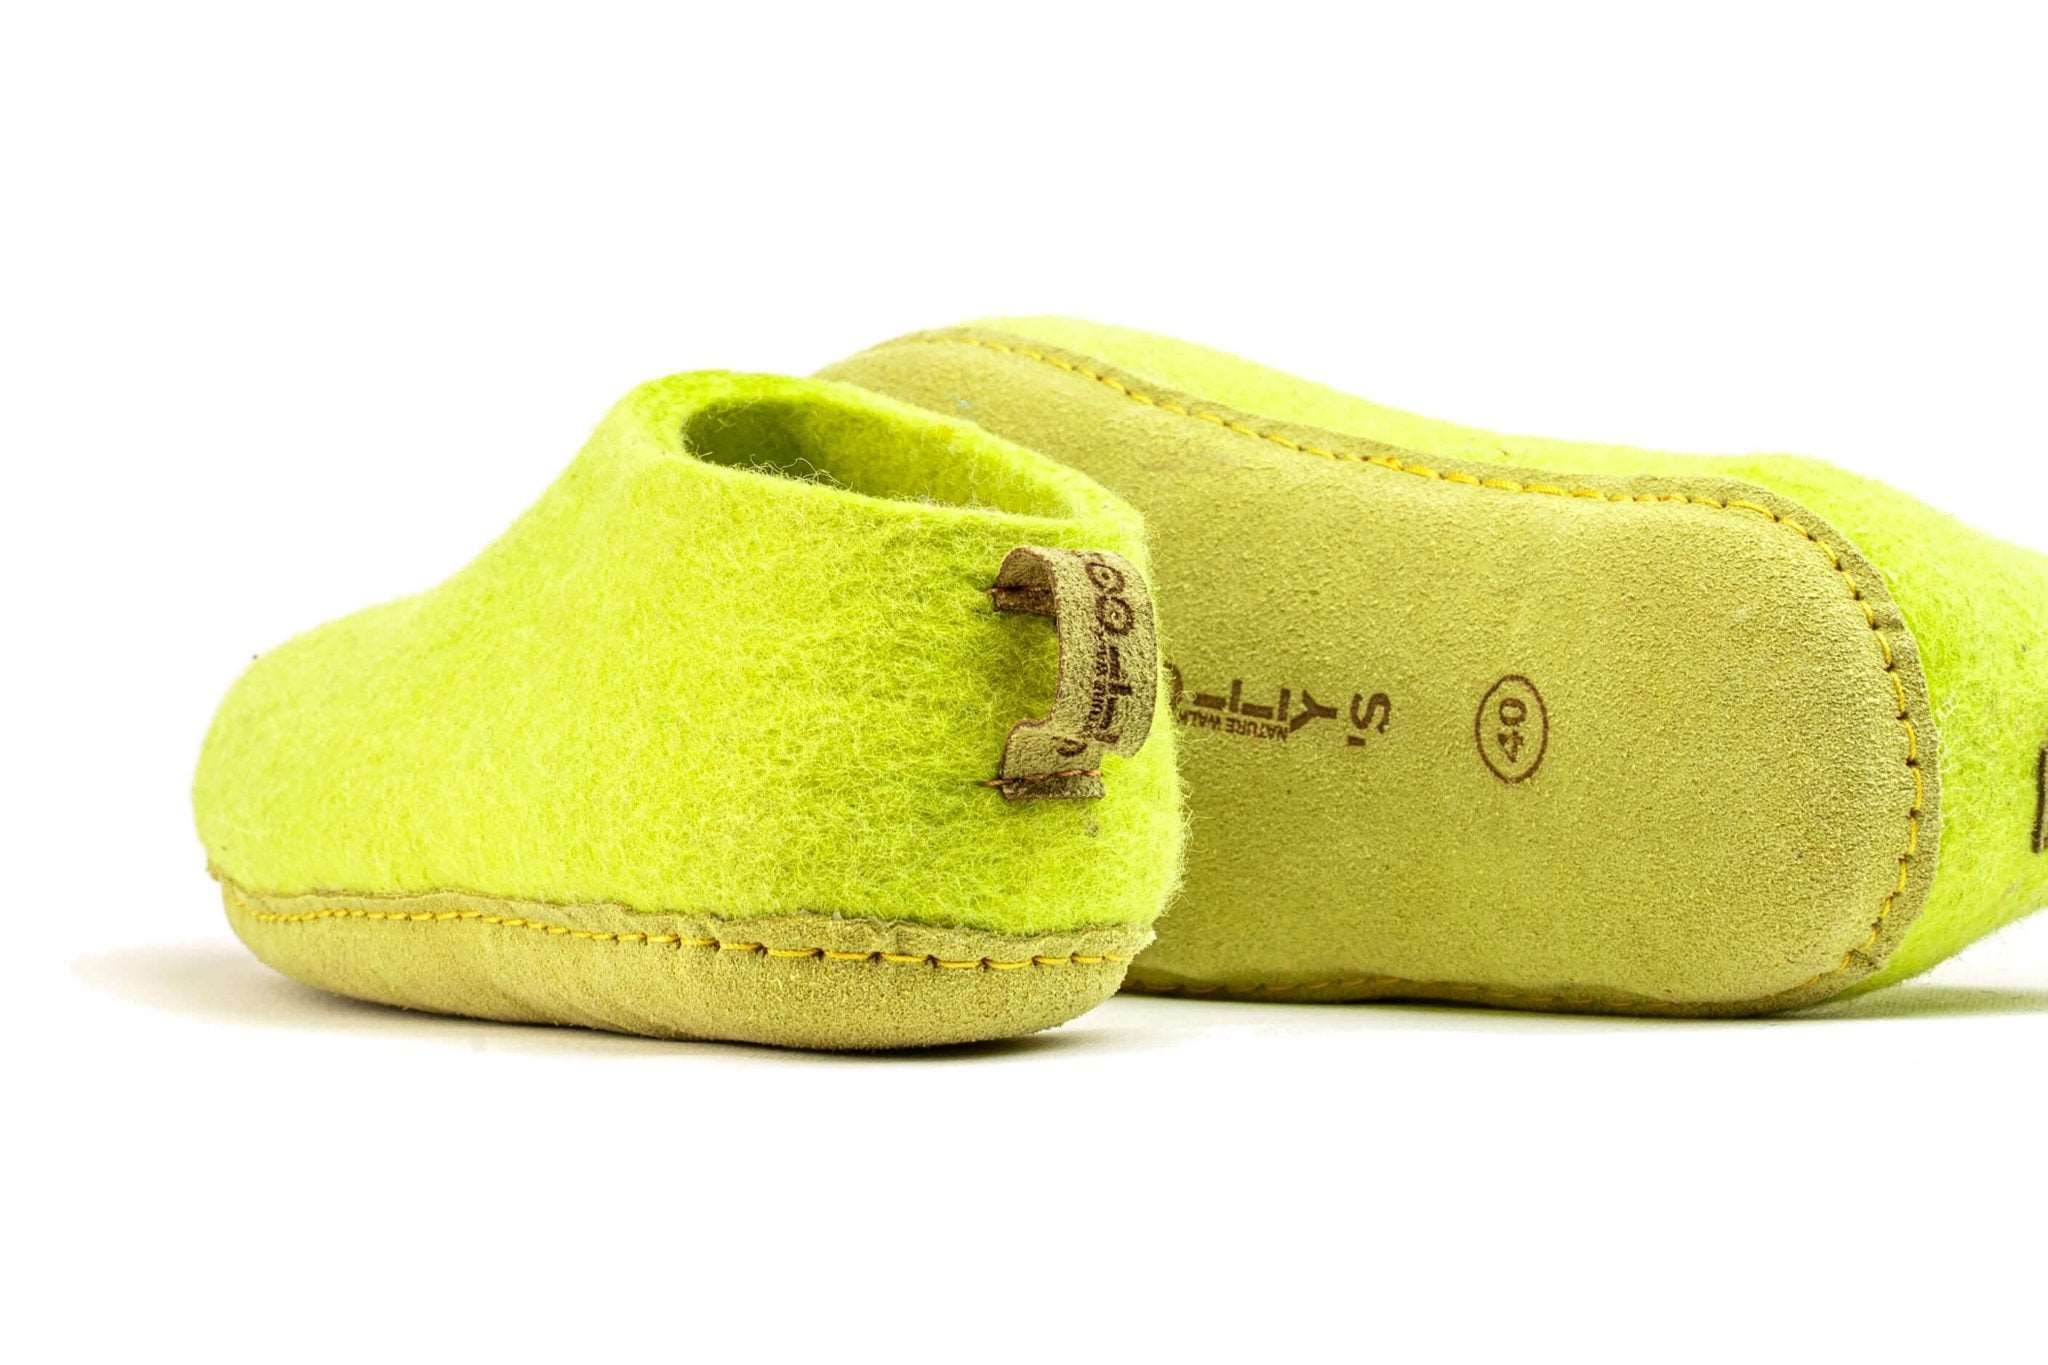 Indoor Shoes With Leather Sole - Lime Green - Woollyes